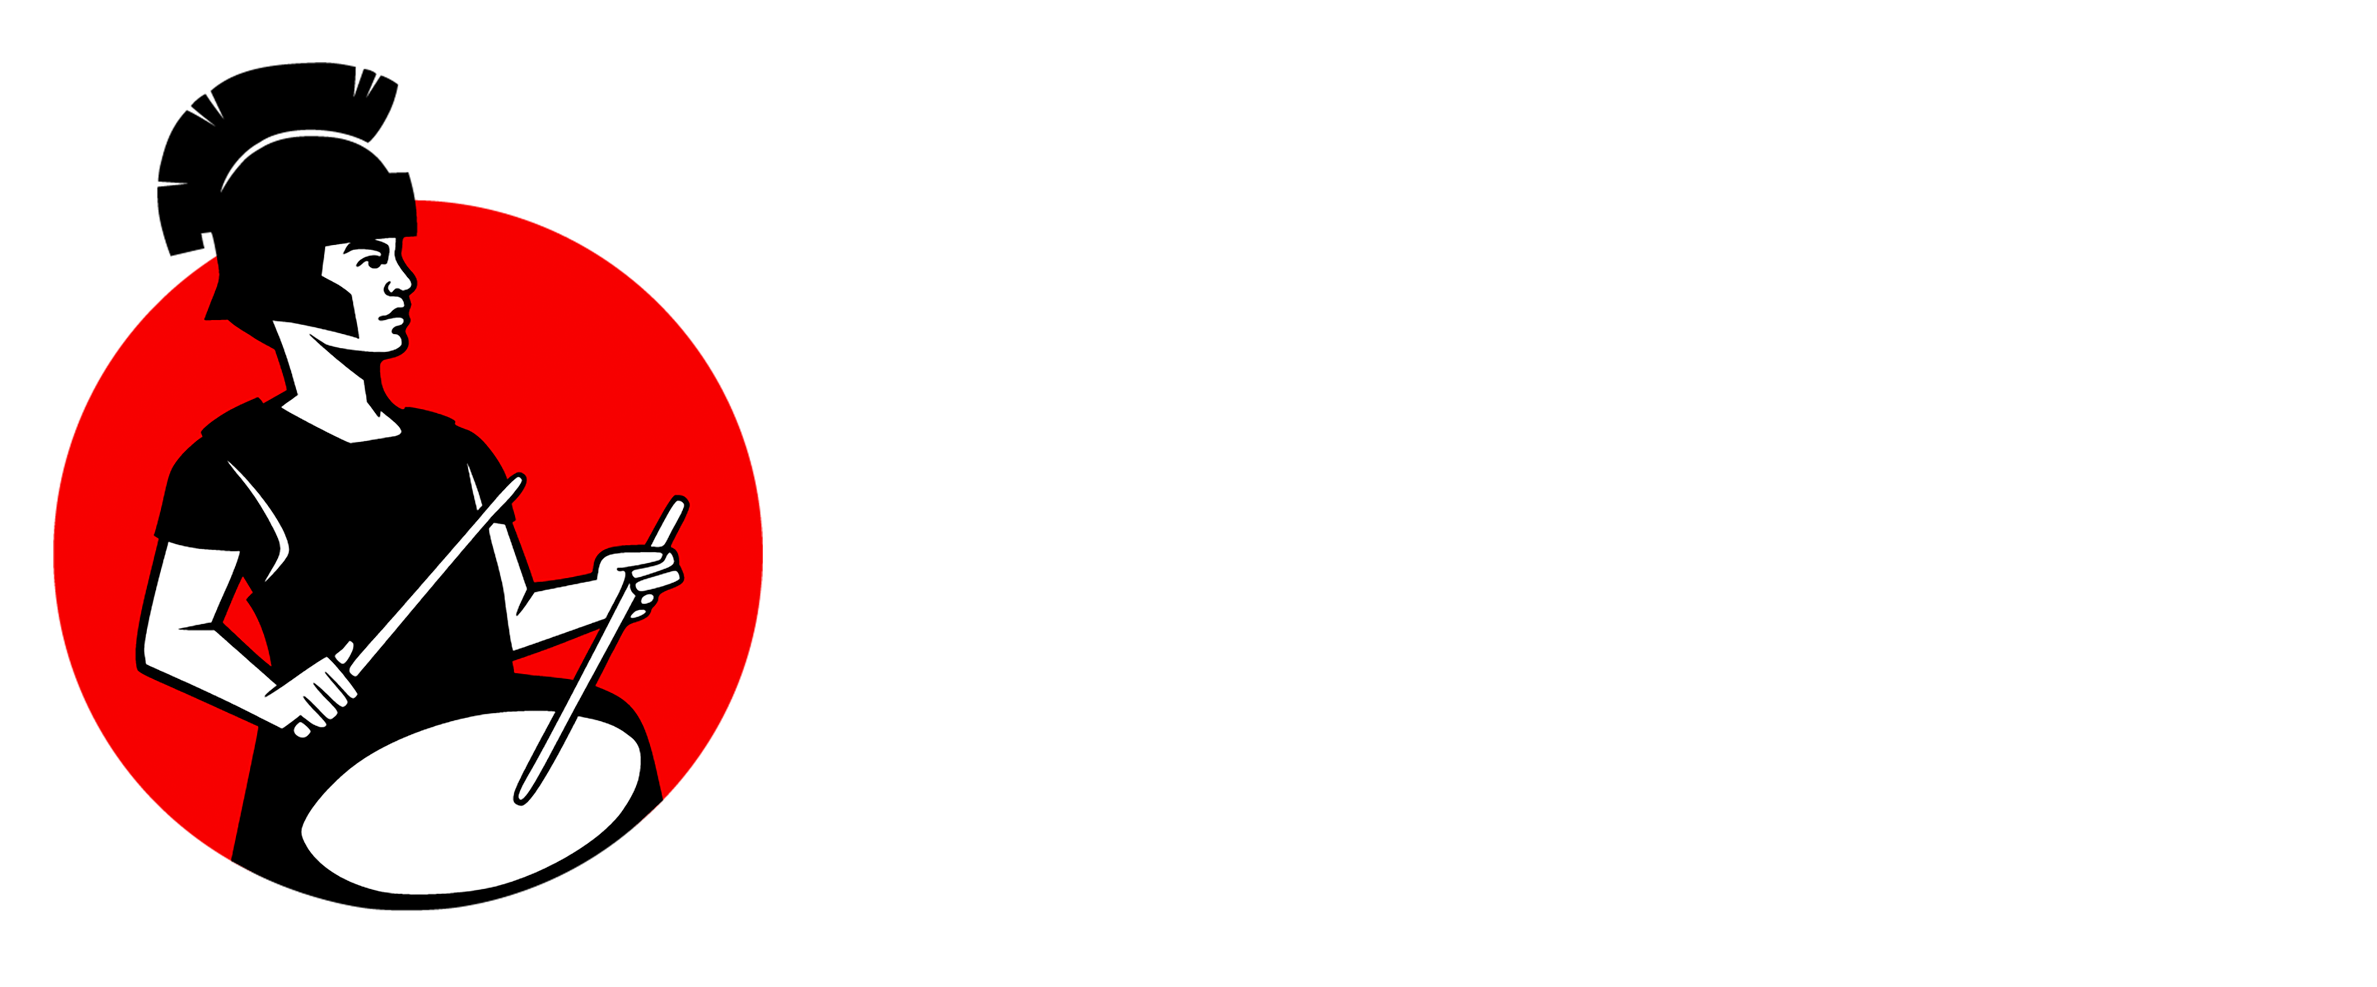 Sound of Drums